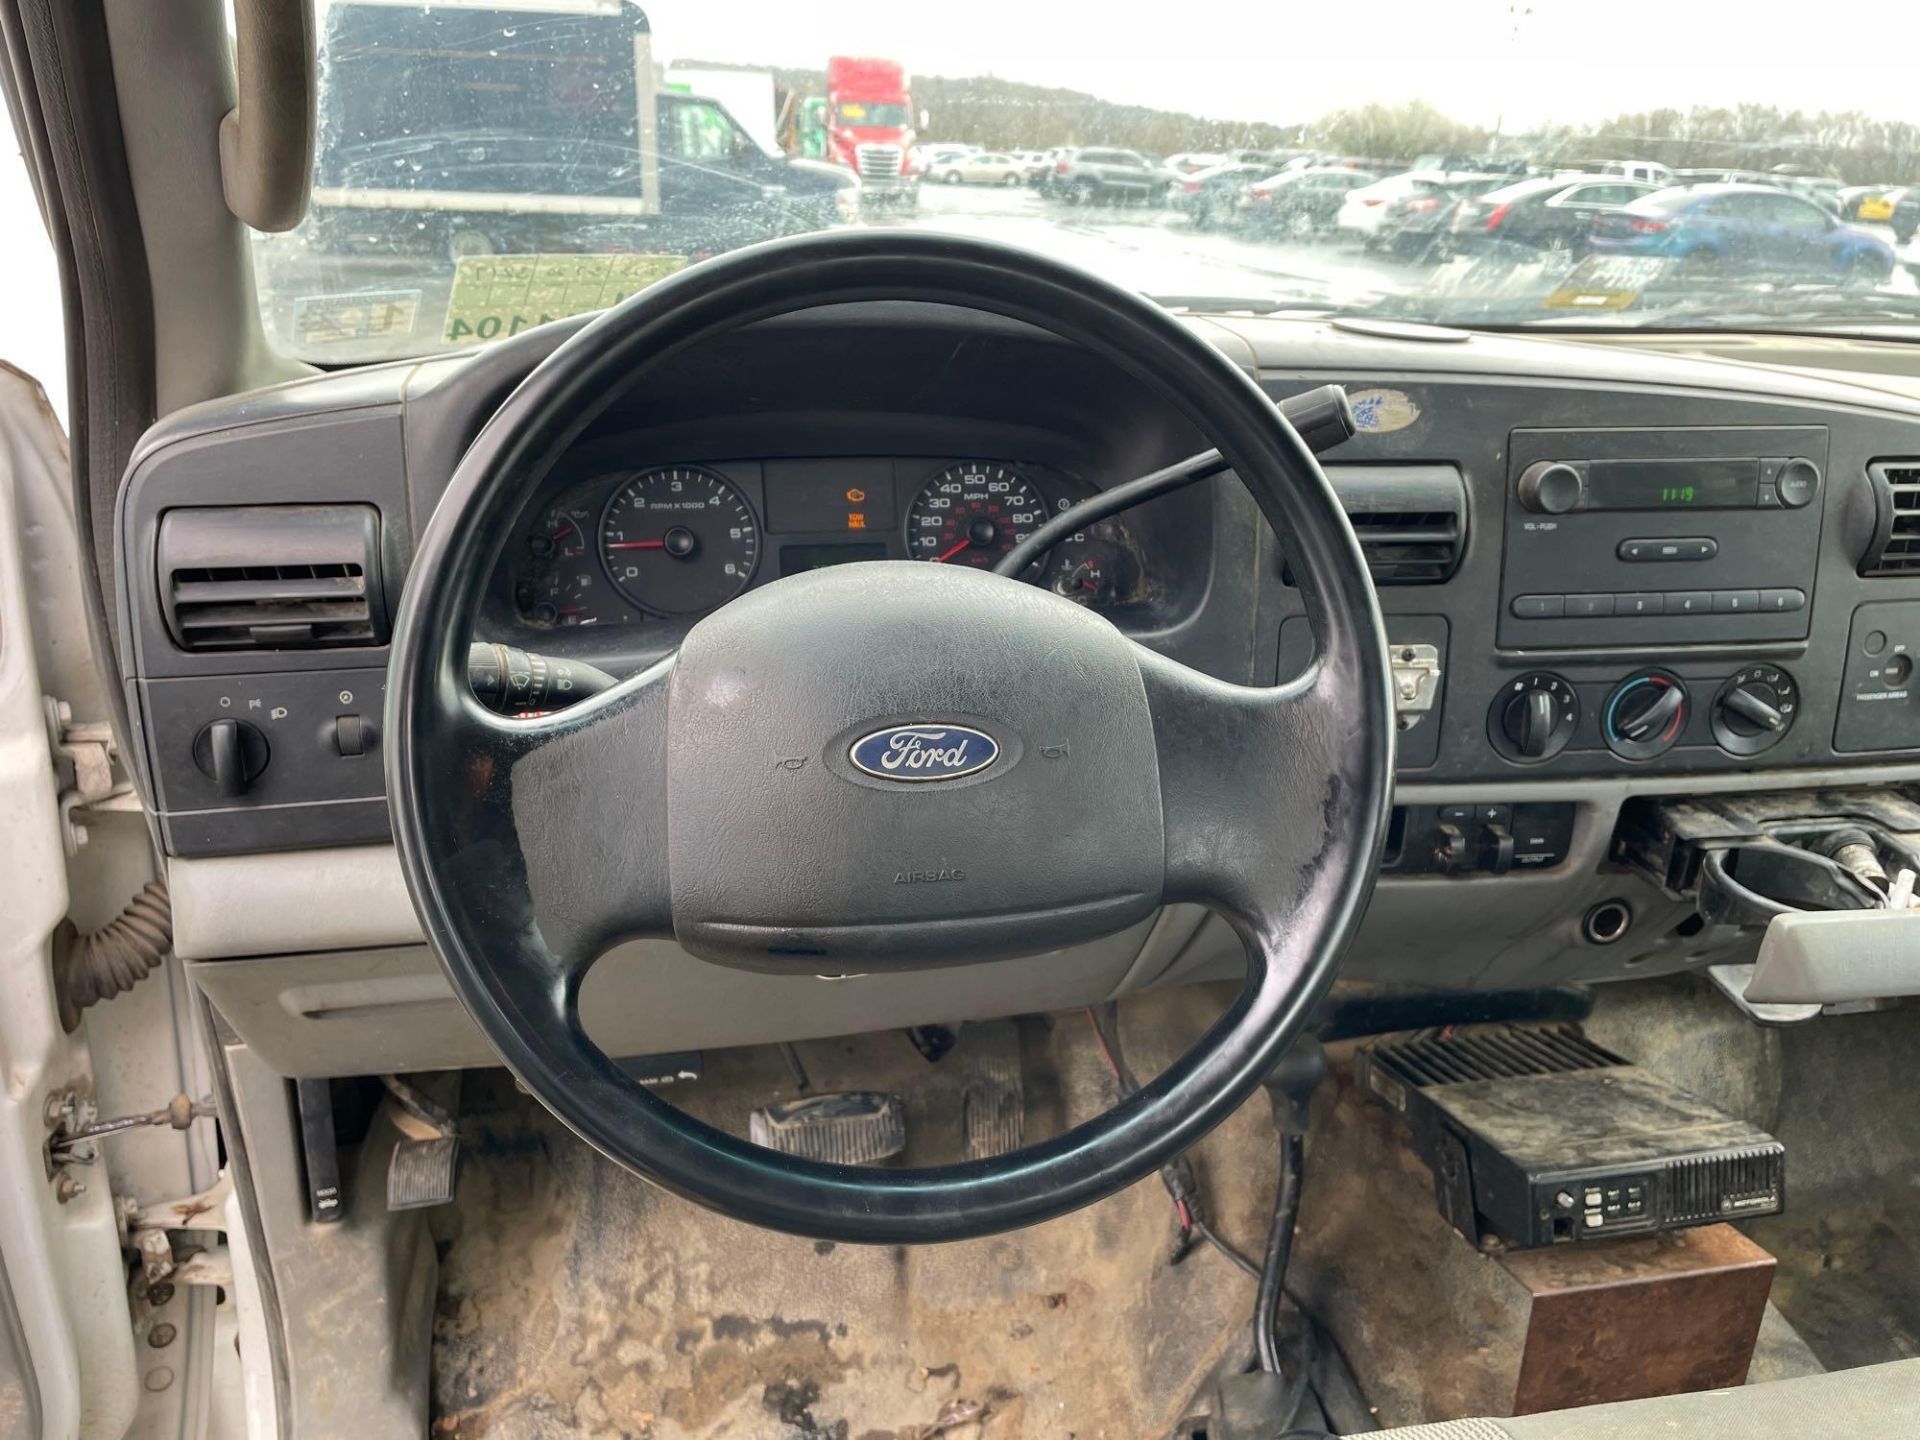 2005 Ford F250 Super Duty 4x4 Pickup Truck - Image 8 of 24